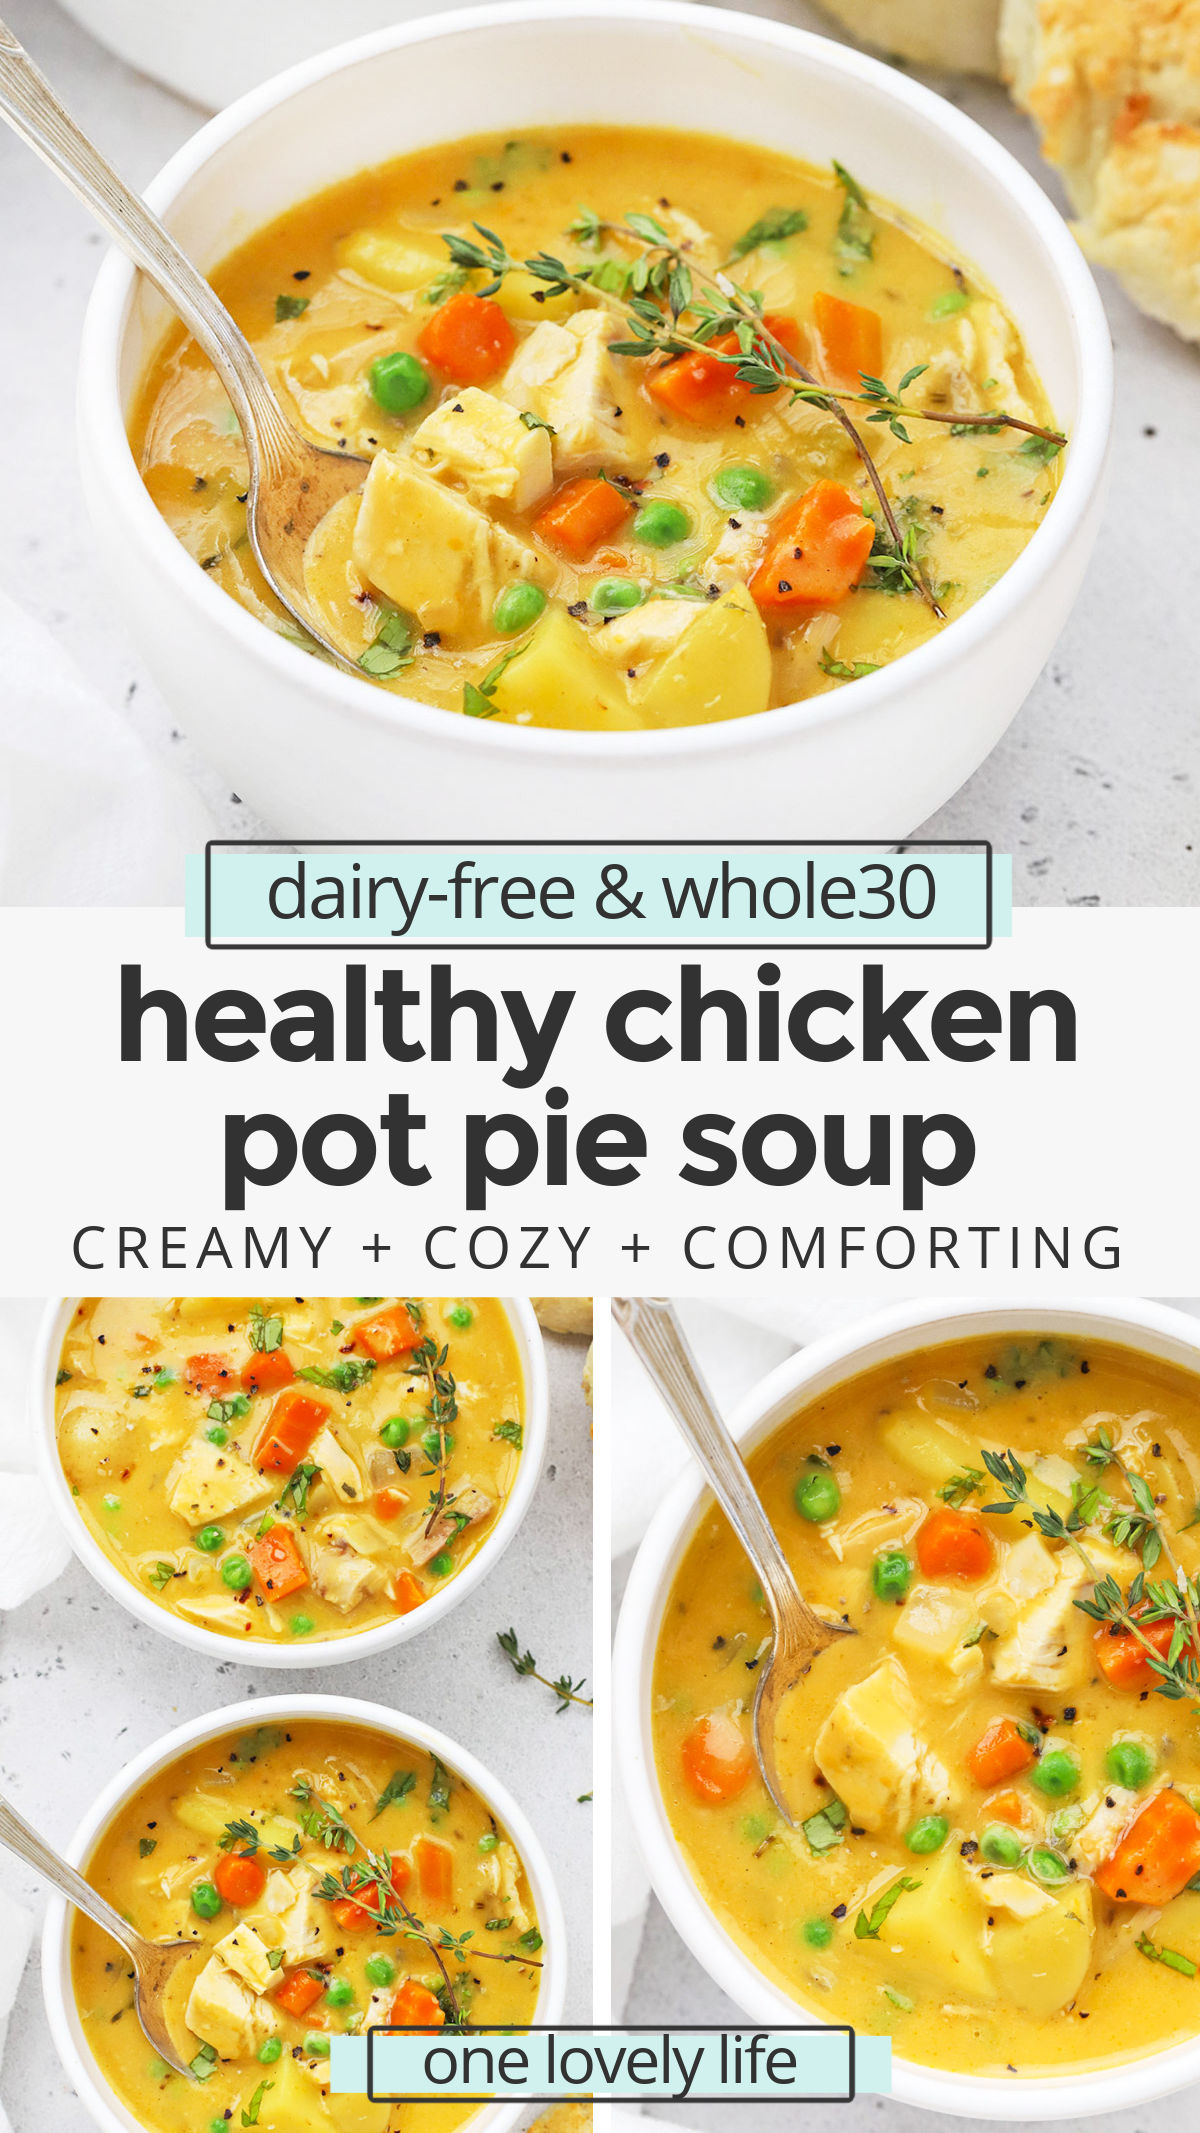 Healthy Chicken Pot Pie Soup - This dairy-free chicken pot pie soup is creamy, delicious, and cozy on a chilly day! (Whole30) // Whole30 Chicken Pot Pie Soup // Healthy Pot Pie Soup // Healthy Turkey Pot Pie Soup // Turkey Leftovers // Thanksgiving Leftovers // Dairy-Free turkey Pot Pie Soup // Whole30 Soup Recipe // Dairy-Free Soup Recipe // Healthy Soup Recipe